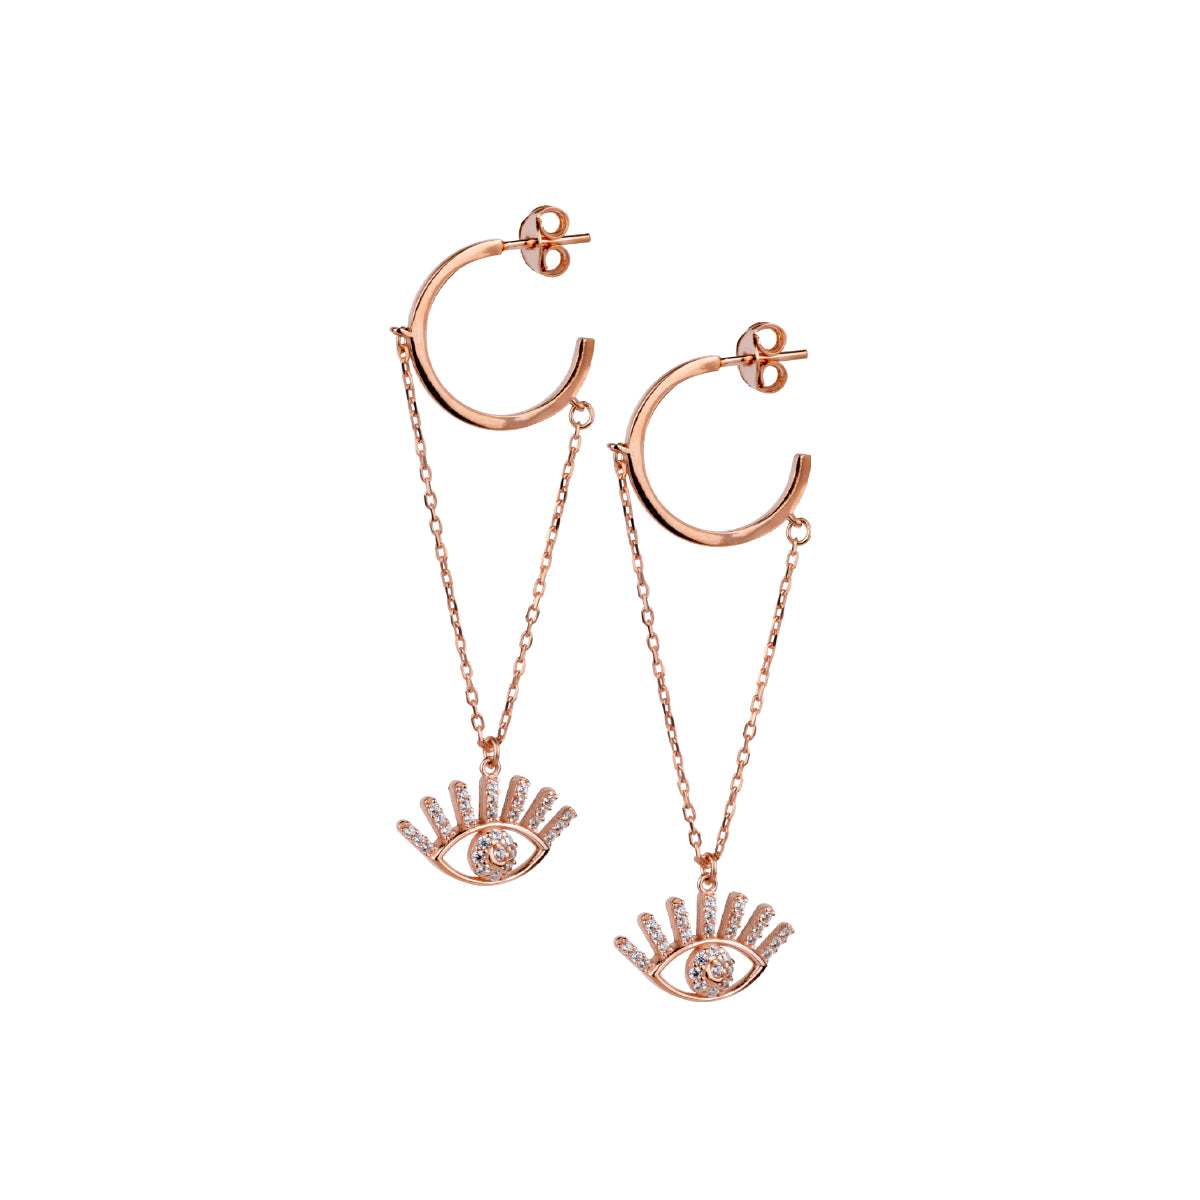 925 Sterling silver, rose gold plated twinkle eye pendant earrings decorated with white zirconia stones.